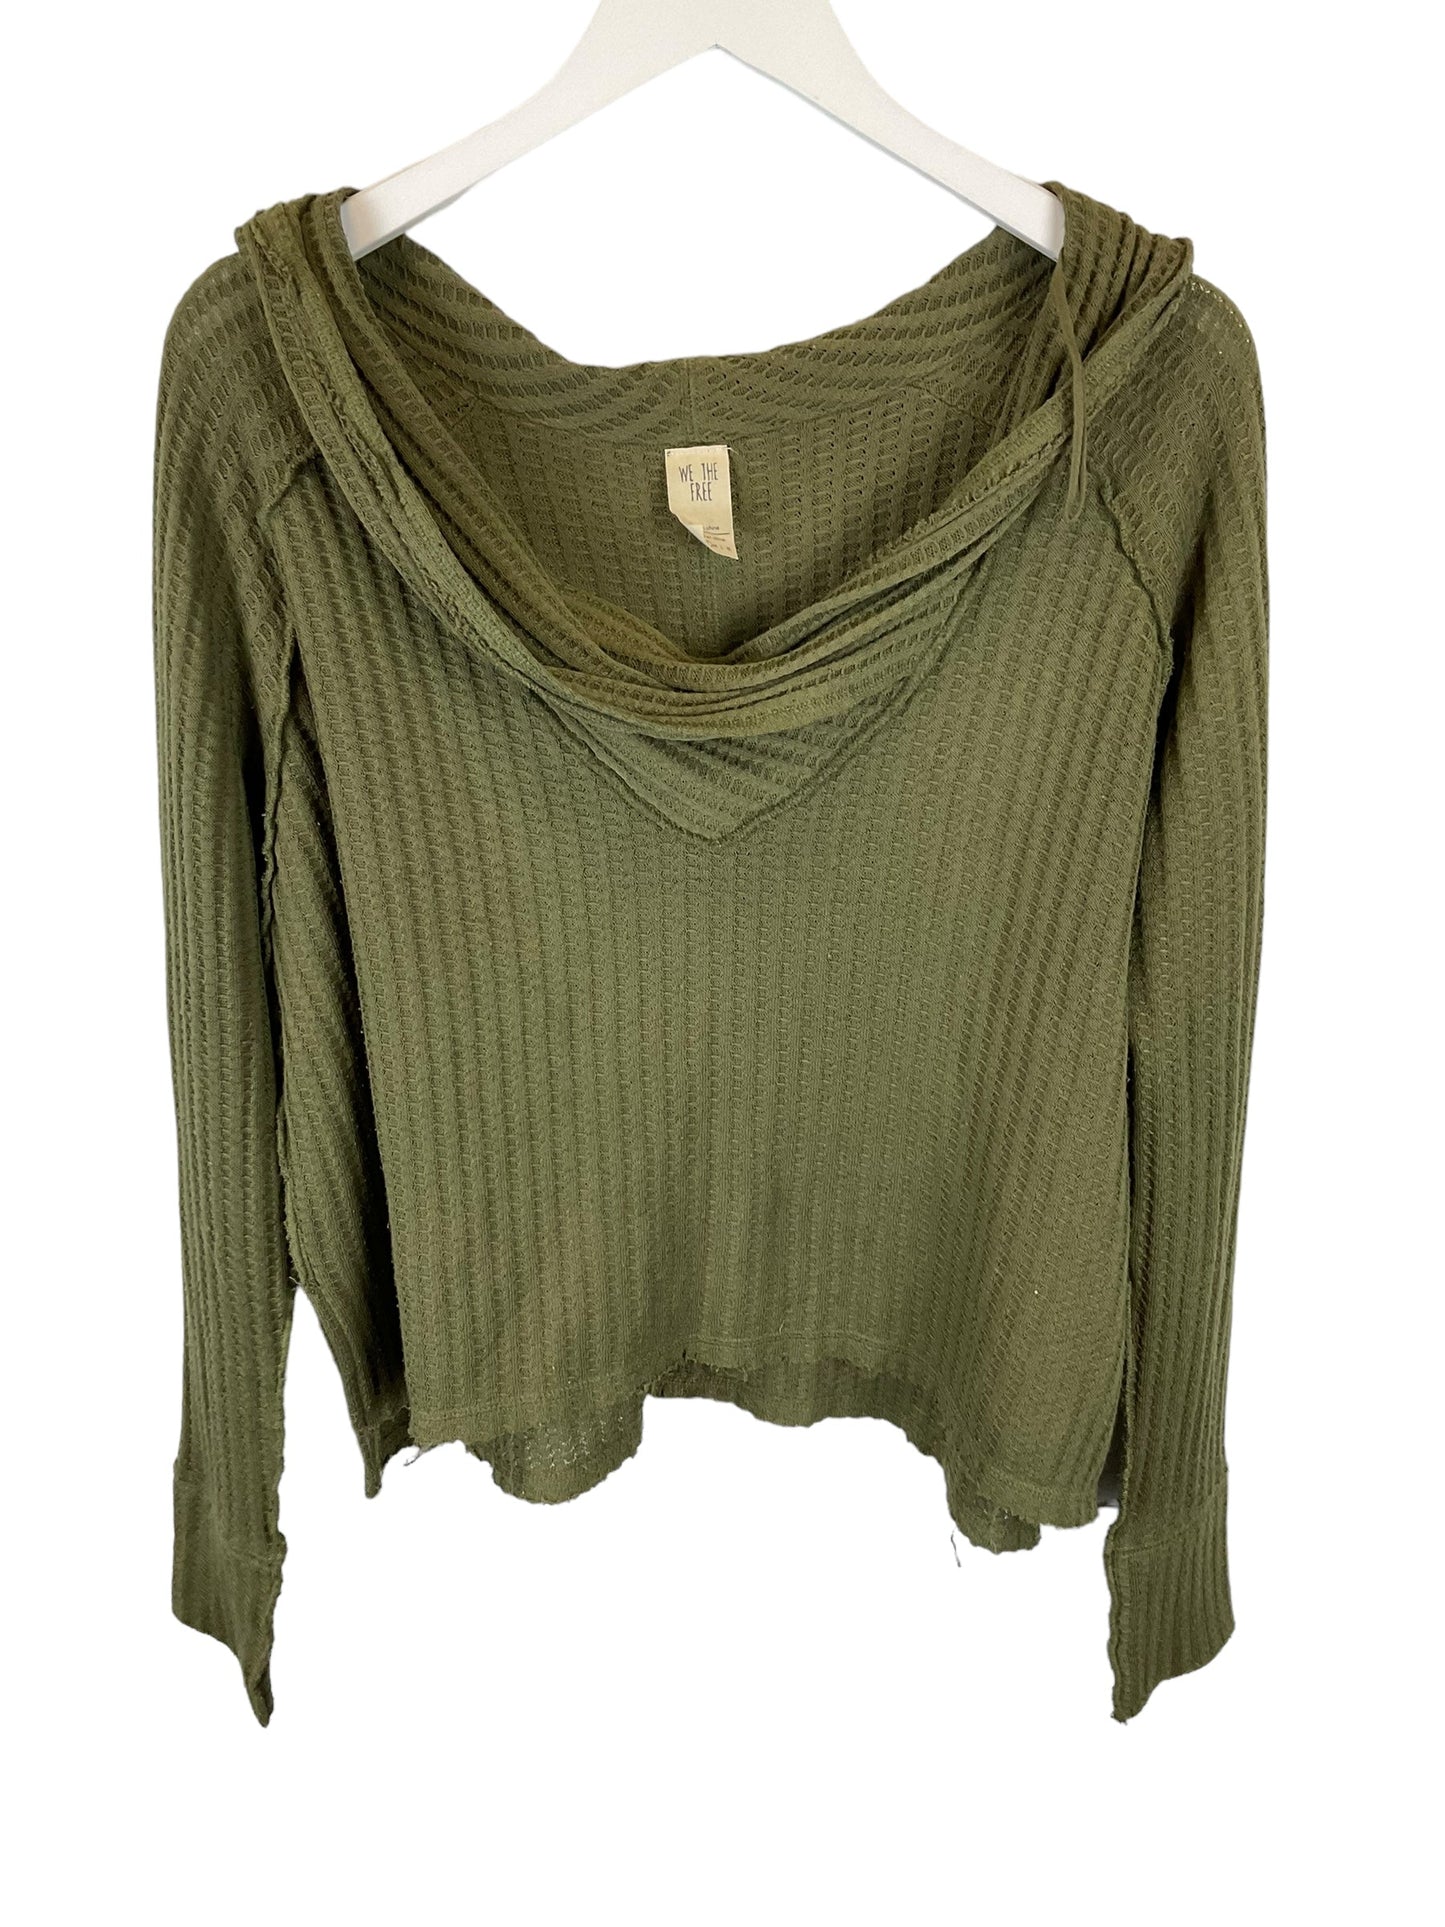 Green Top Long Sleeve We The Free, Size S